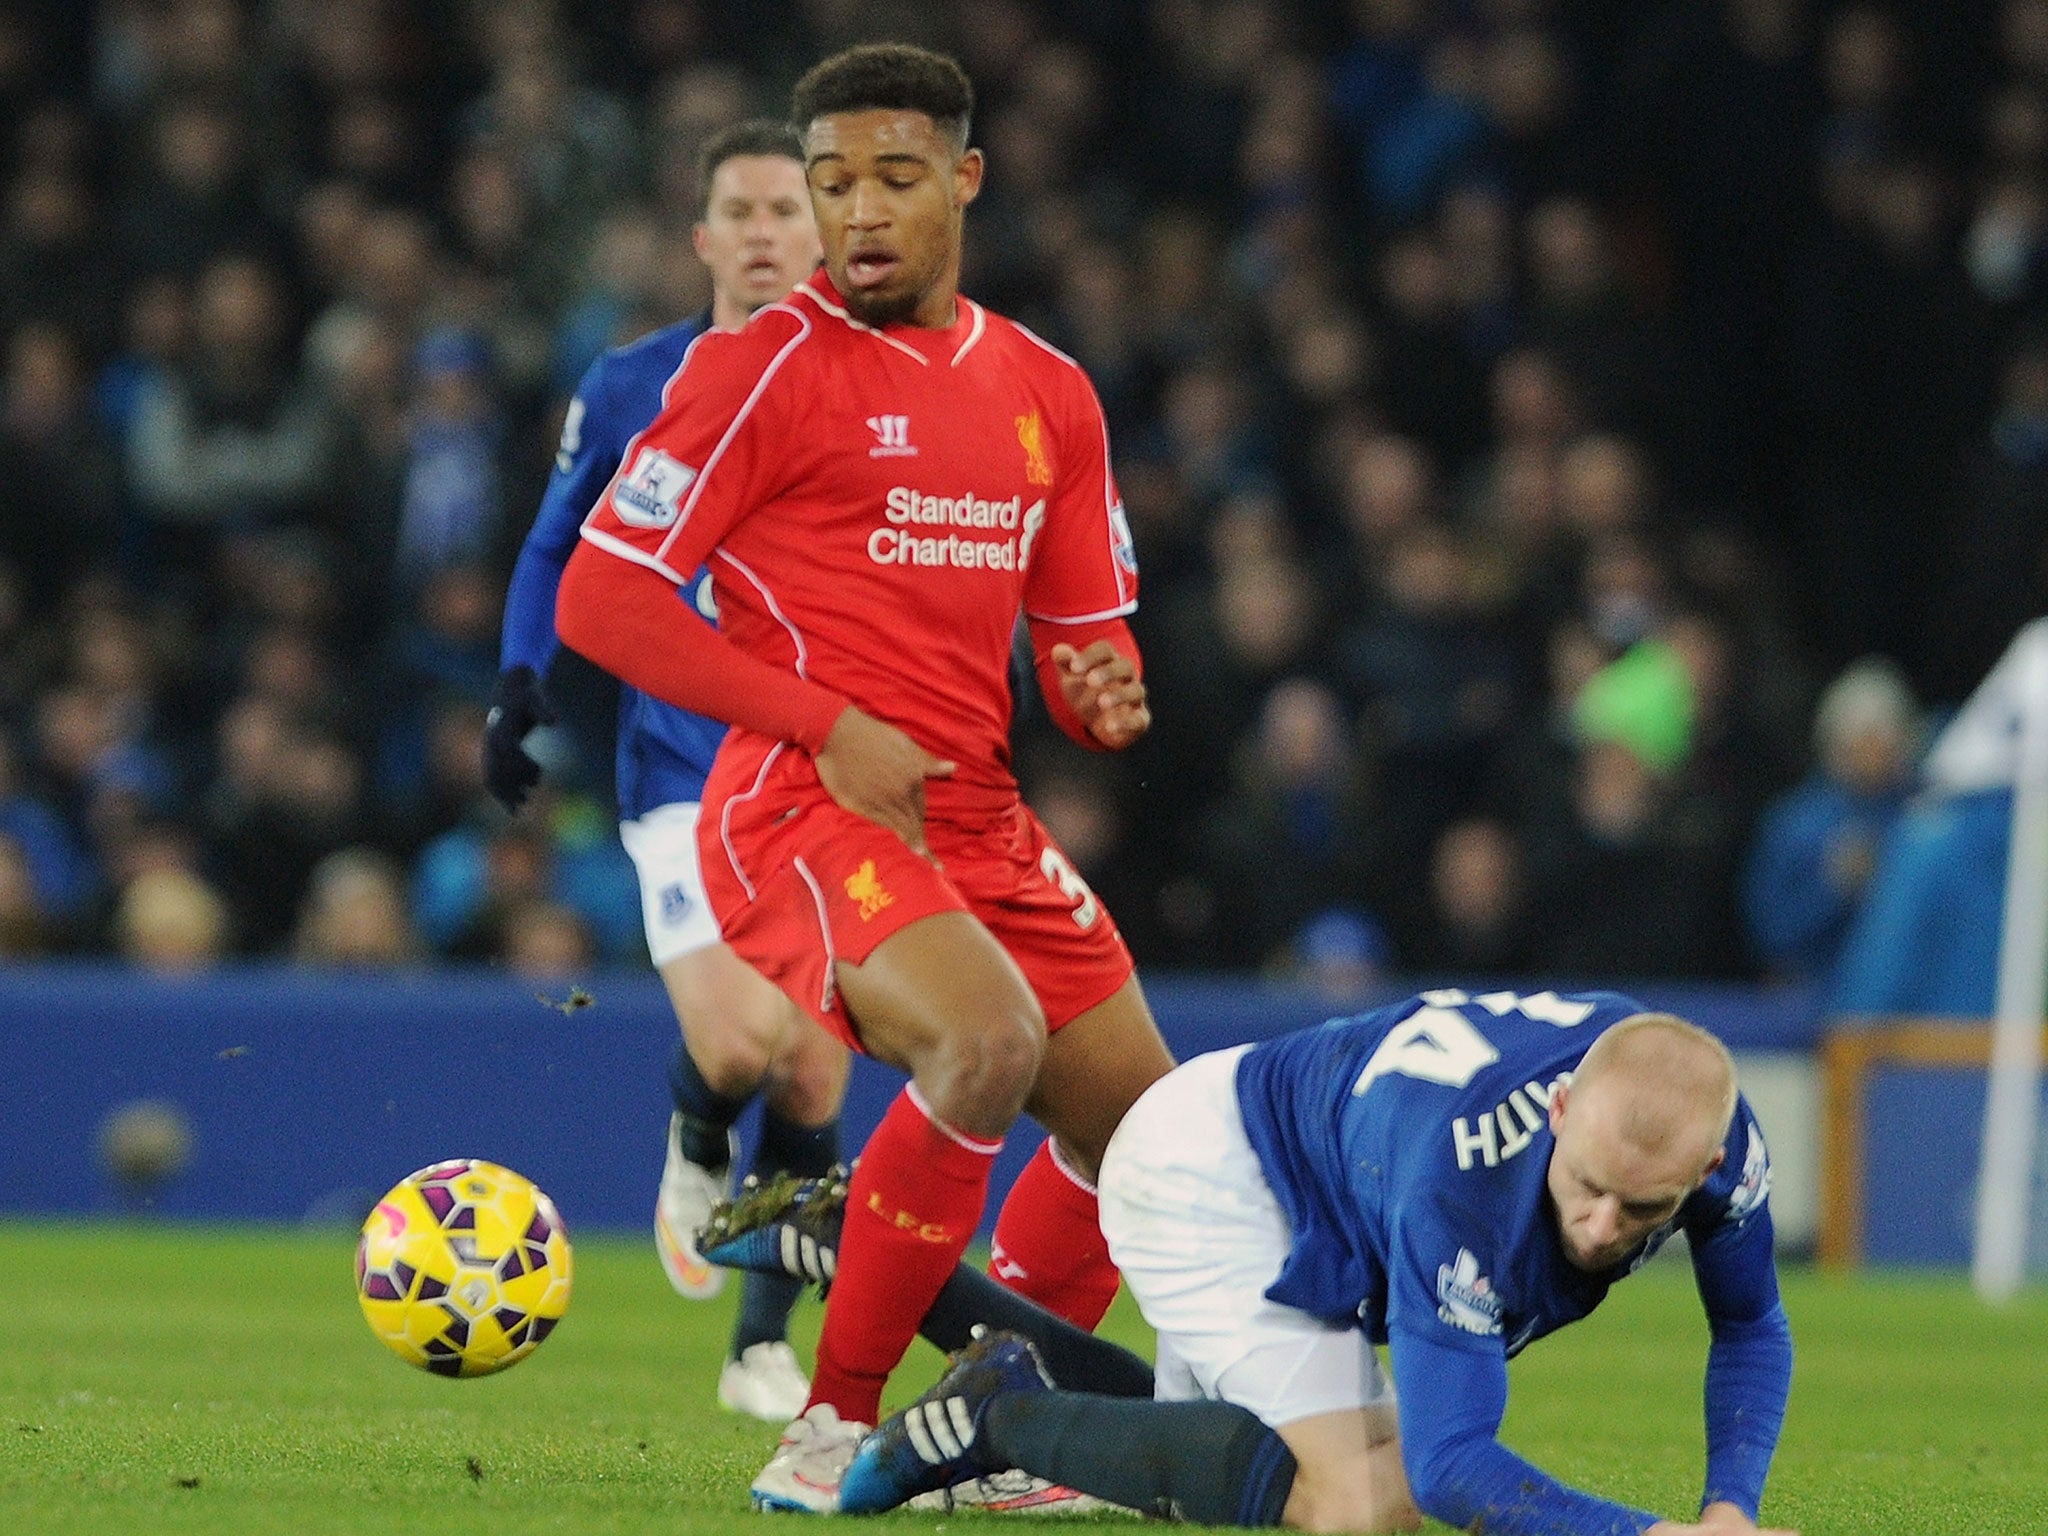 Jordon Ibe came closest to breaking the deadlock